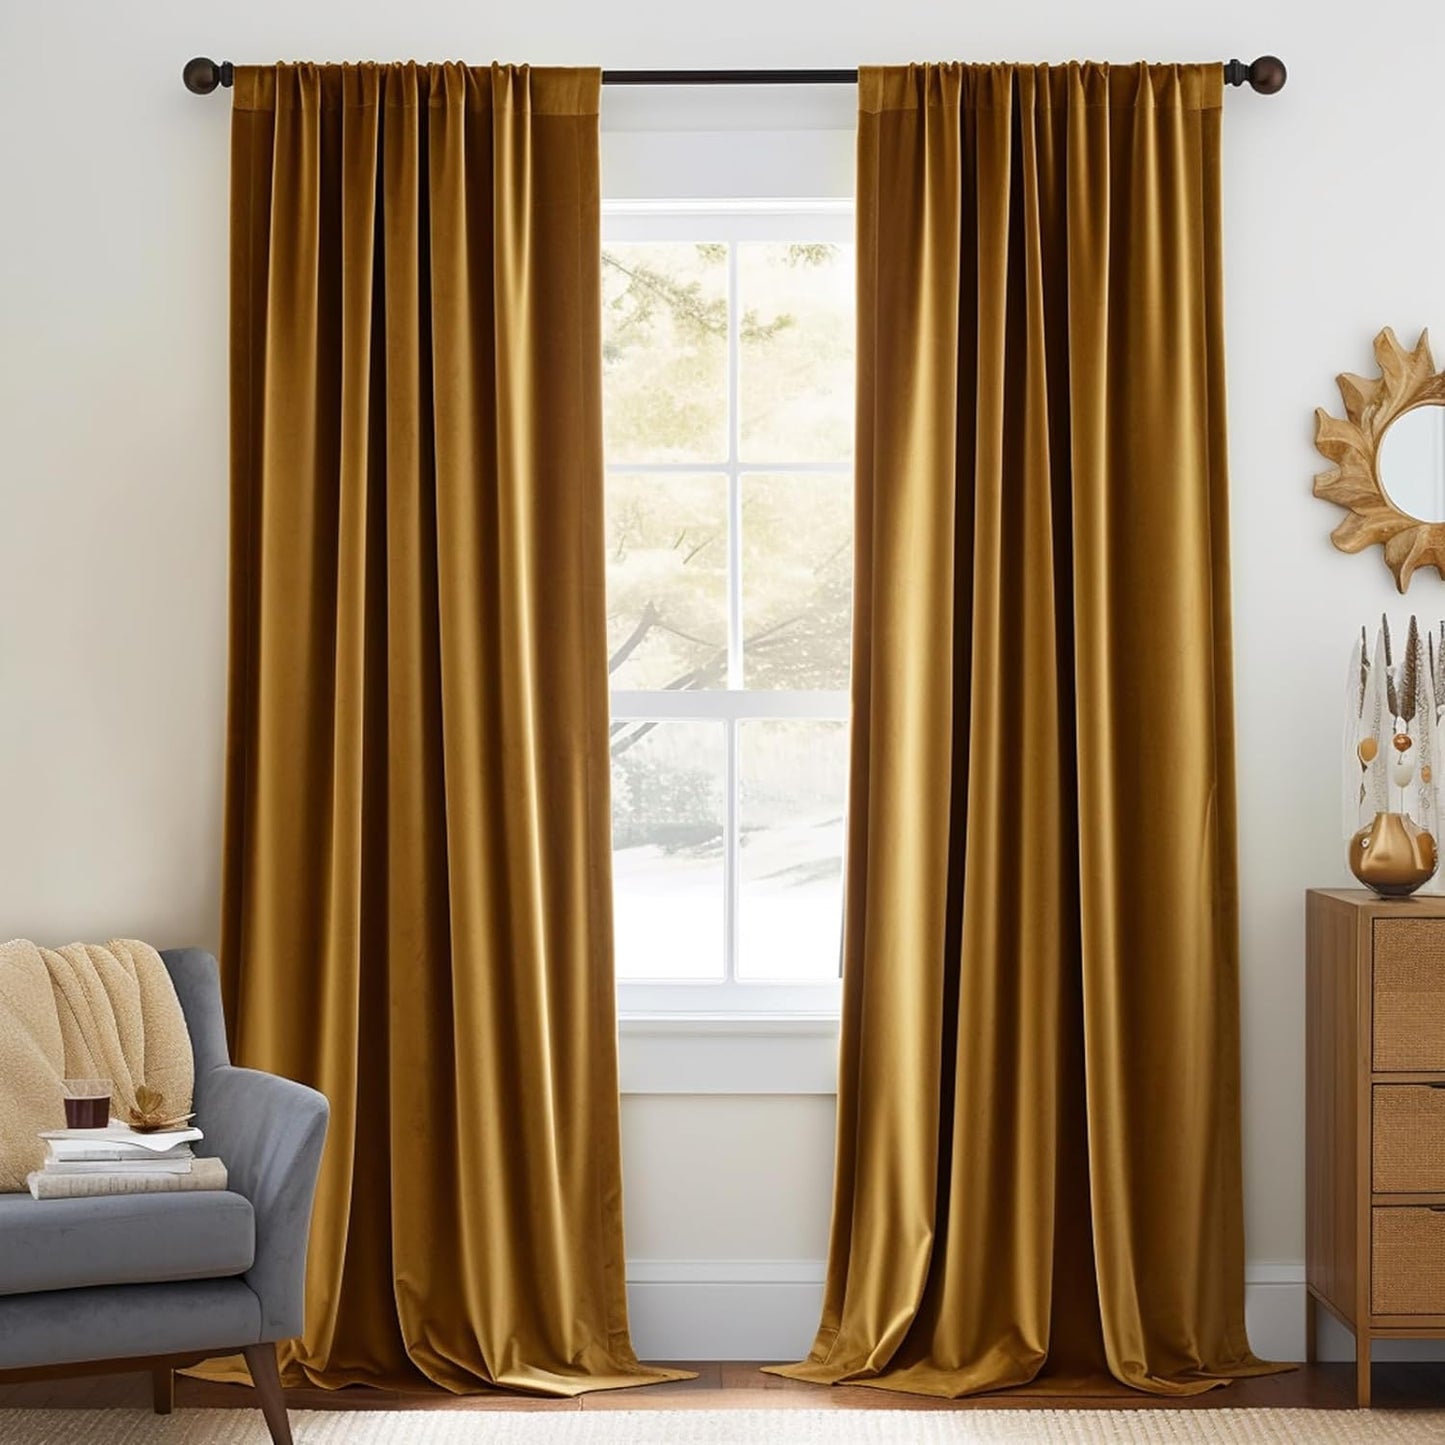 Jinchan Velvet Blackout Curtain for Living Room, Thermal Insulated Luxury Drape for Bedroom 96 Inch Long, Stylish Soft Privacy Room Darkening Window Treatment Rod Pocket 1 Panel, Emerald Green  CKNY HOME FASHION Rod Pocket | Gold Brown W52 X L120 